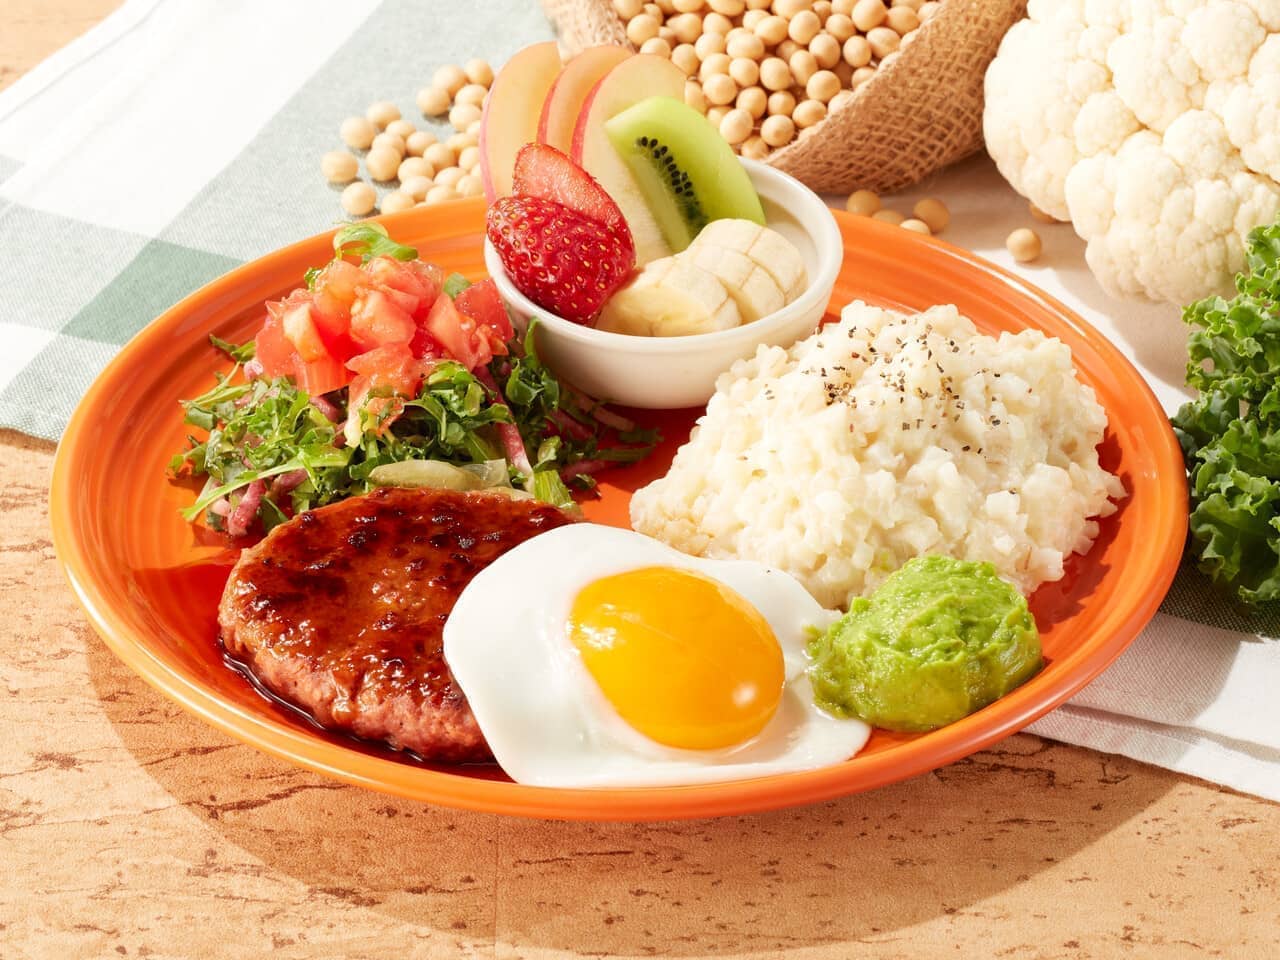 Cocos "Healthy Plate with Non-Meat Hamburger Steak and Cauliflower Rice"